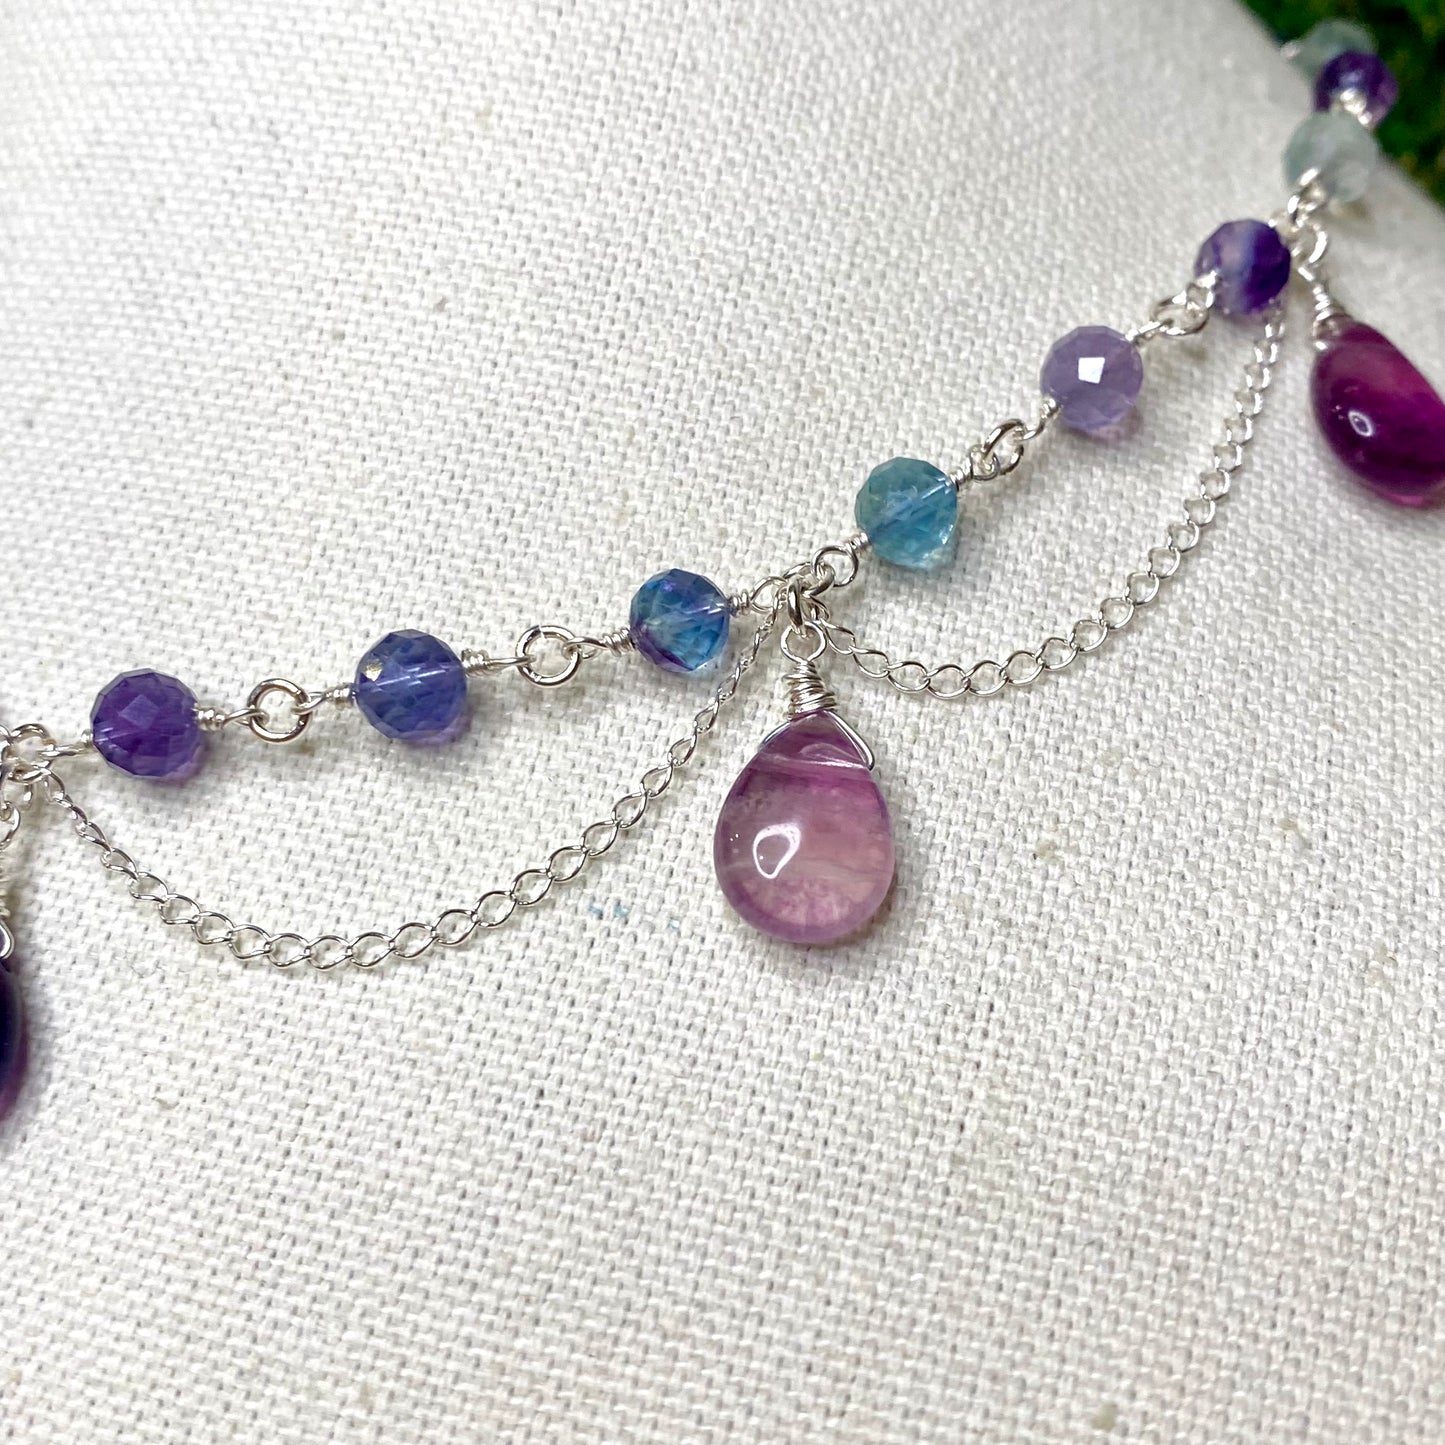 Fluorite & Sterling Silver Chain Link Necklace with Teardrops & Chain Accents